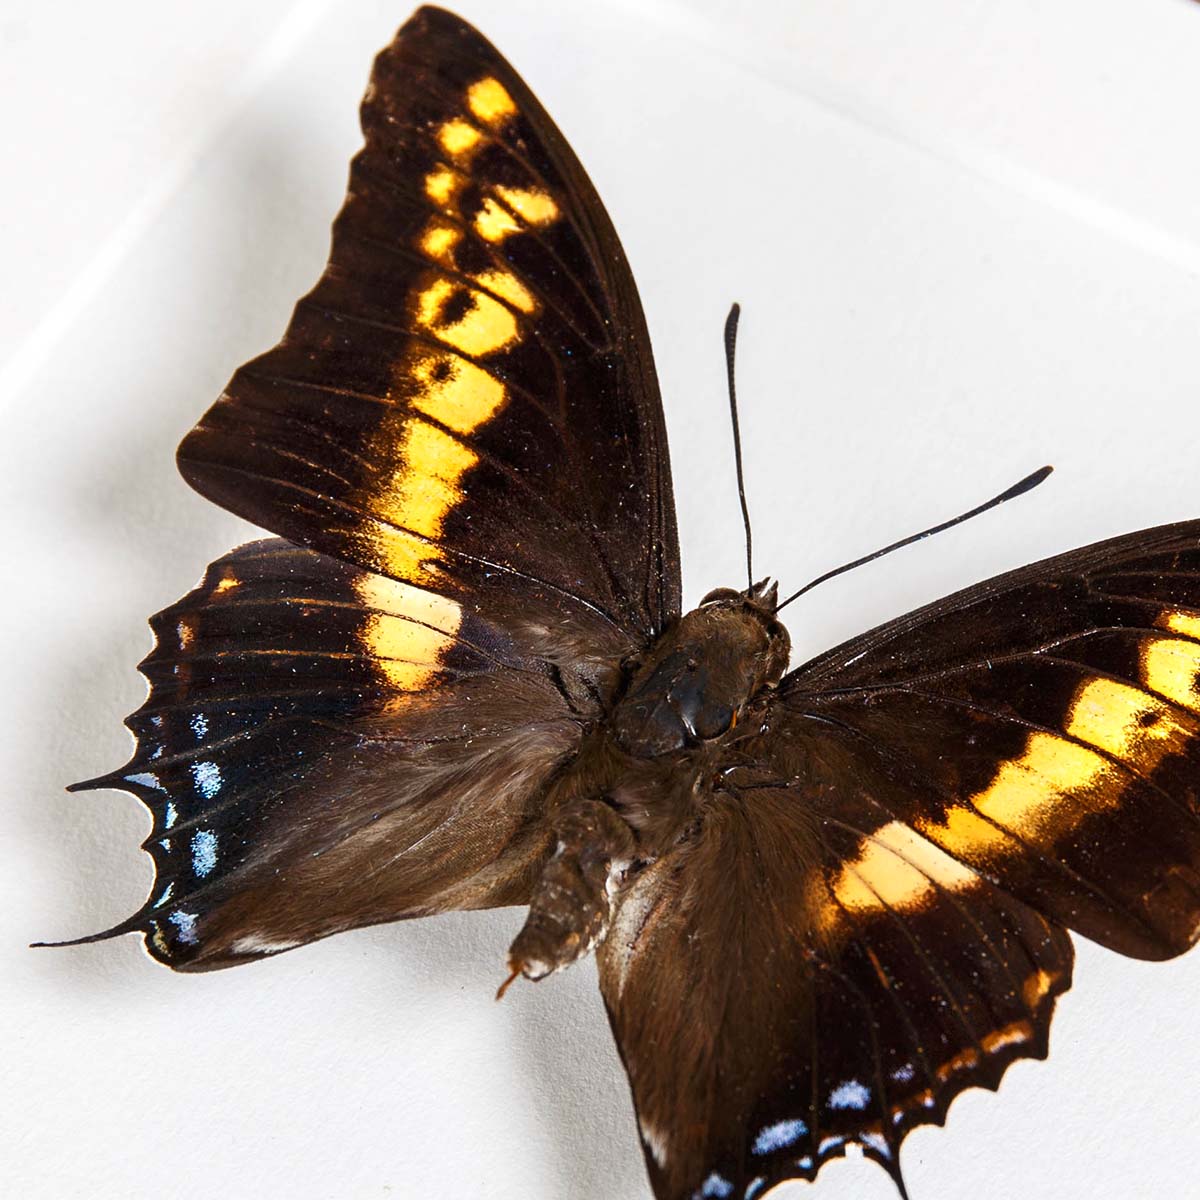 Giant Emperor Butterfly In Box Frame (Charaxes castors)